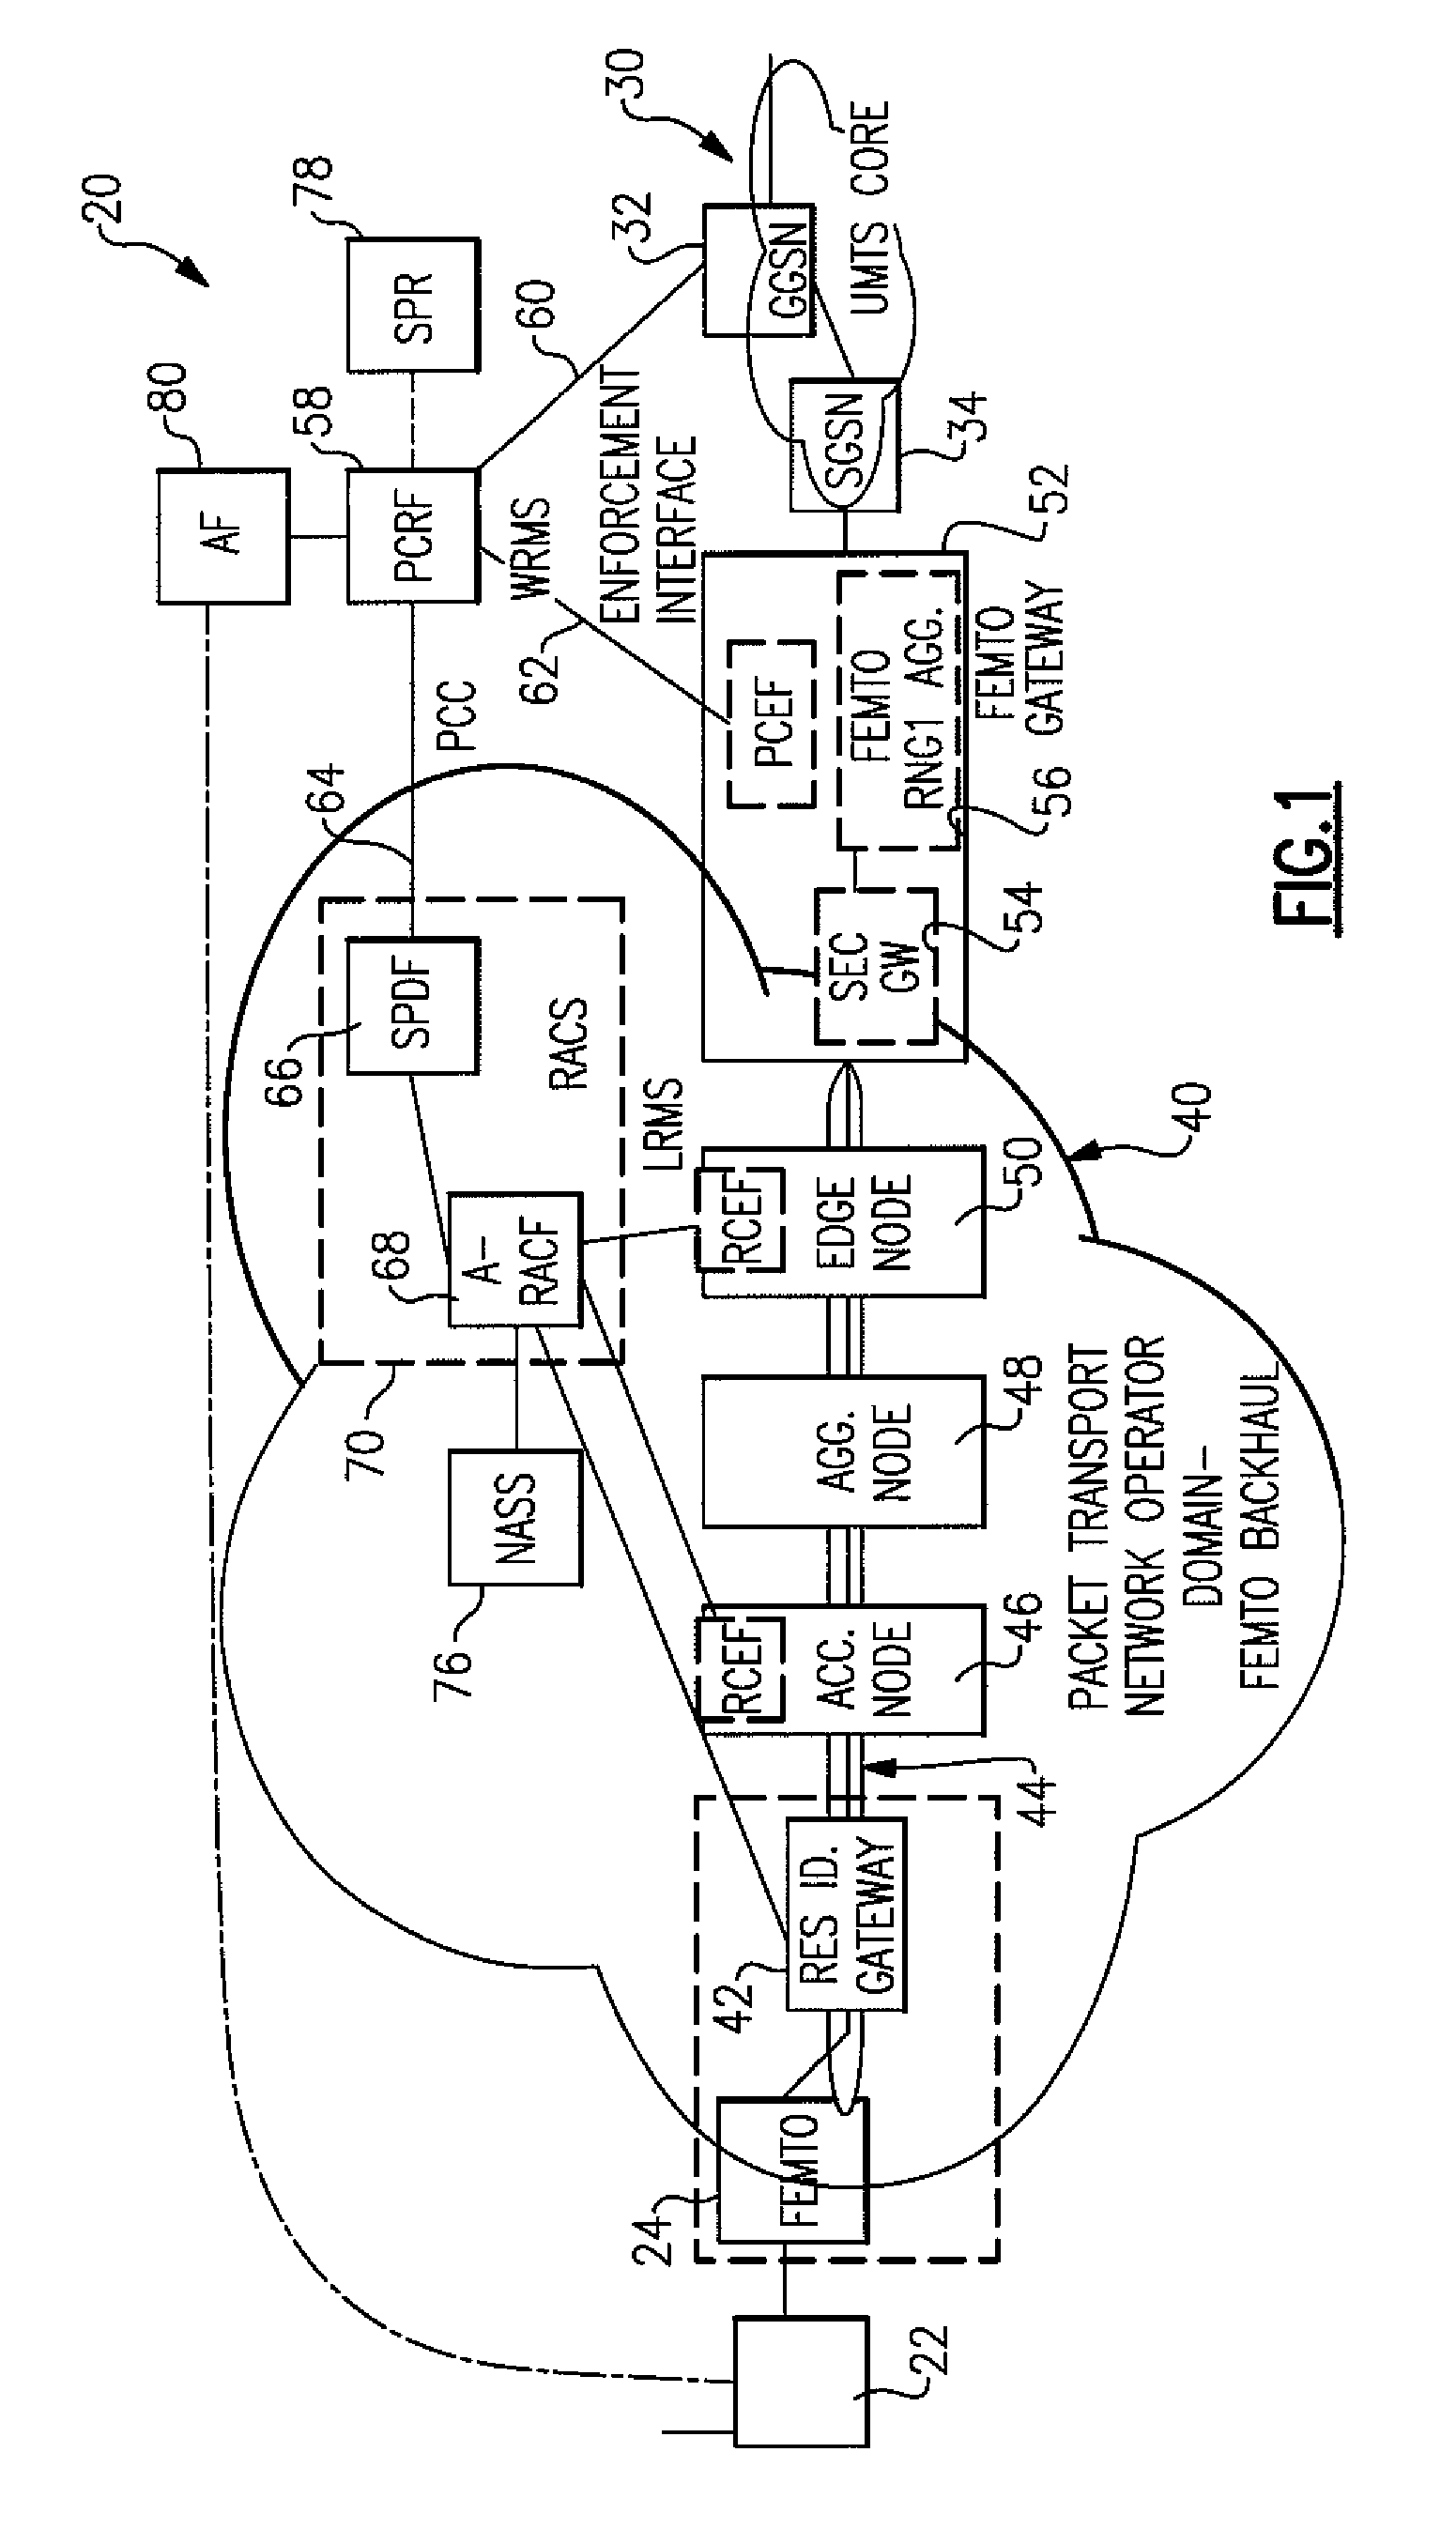 Dynamic quality of service control to facilitate femto base station communications